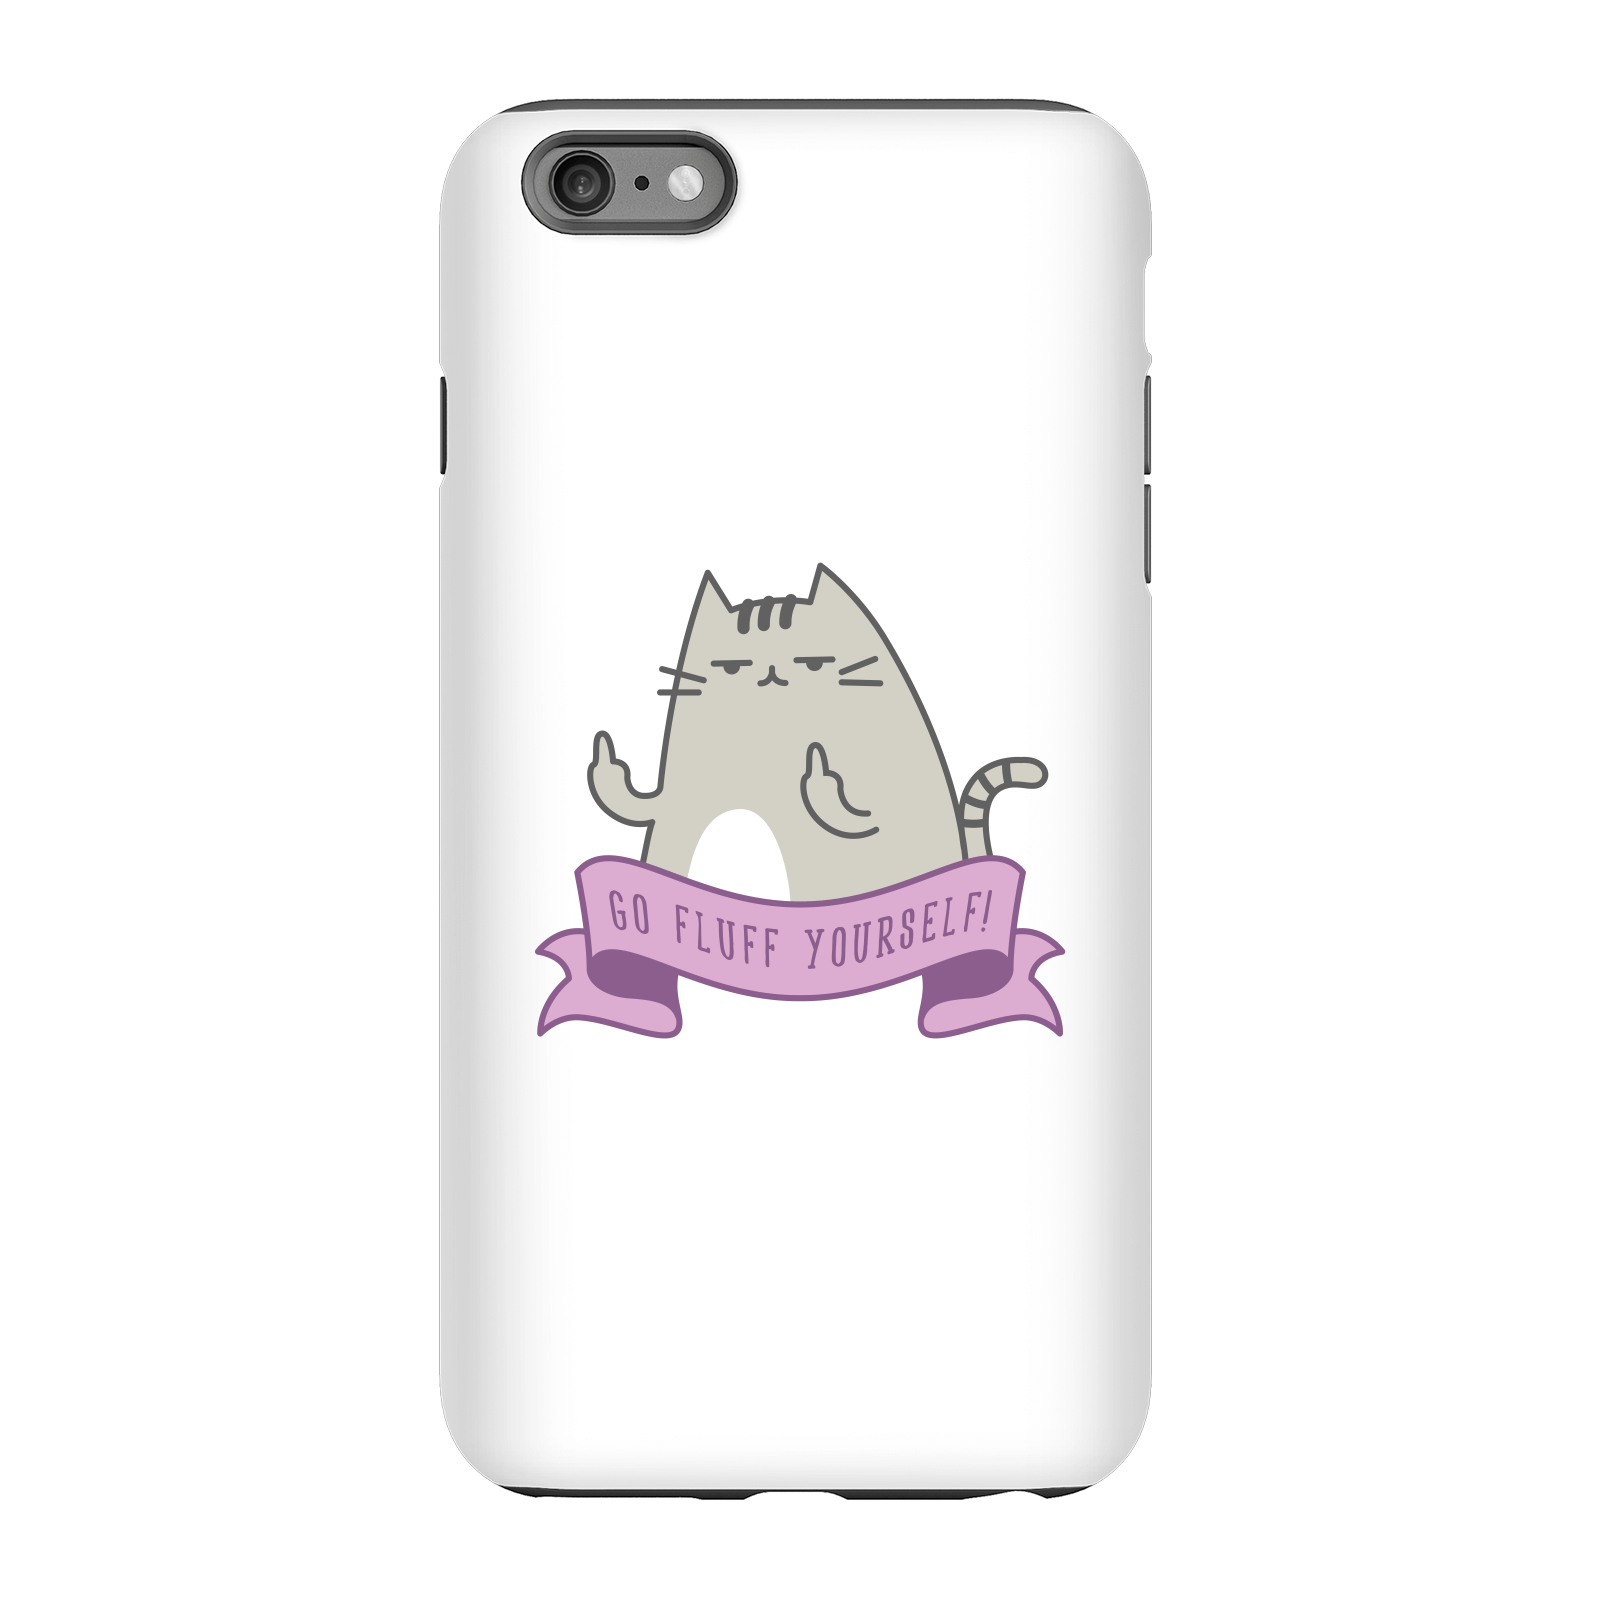 Go Fluff Yourself! Phone Case for iPhone and Android - iPhone 6 Plus - Tough Case - Matte